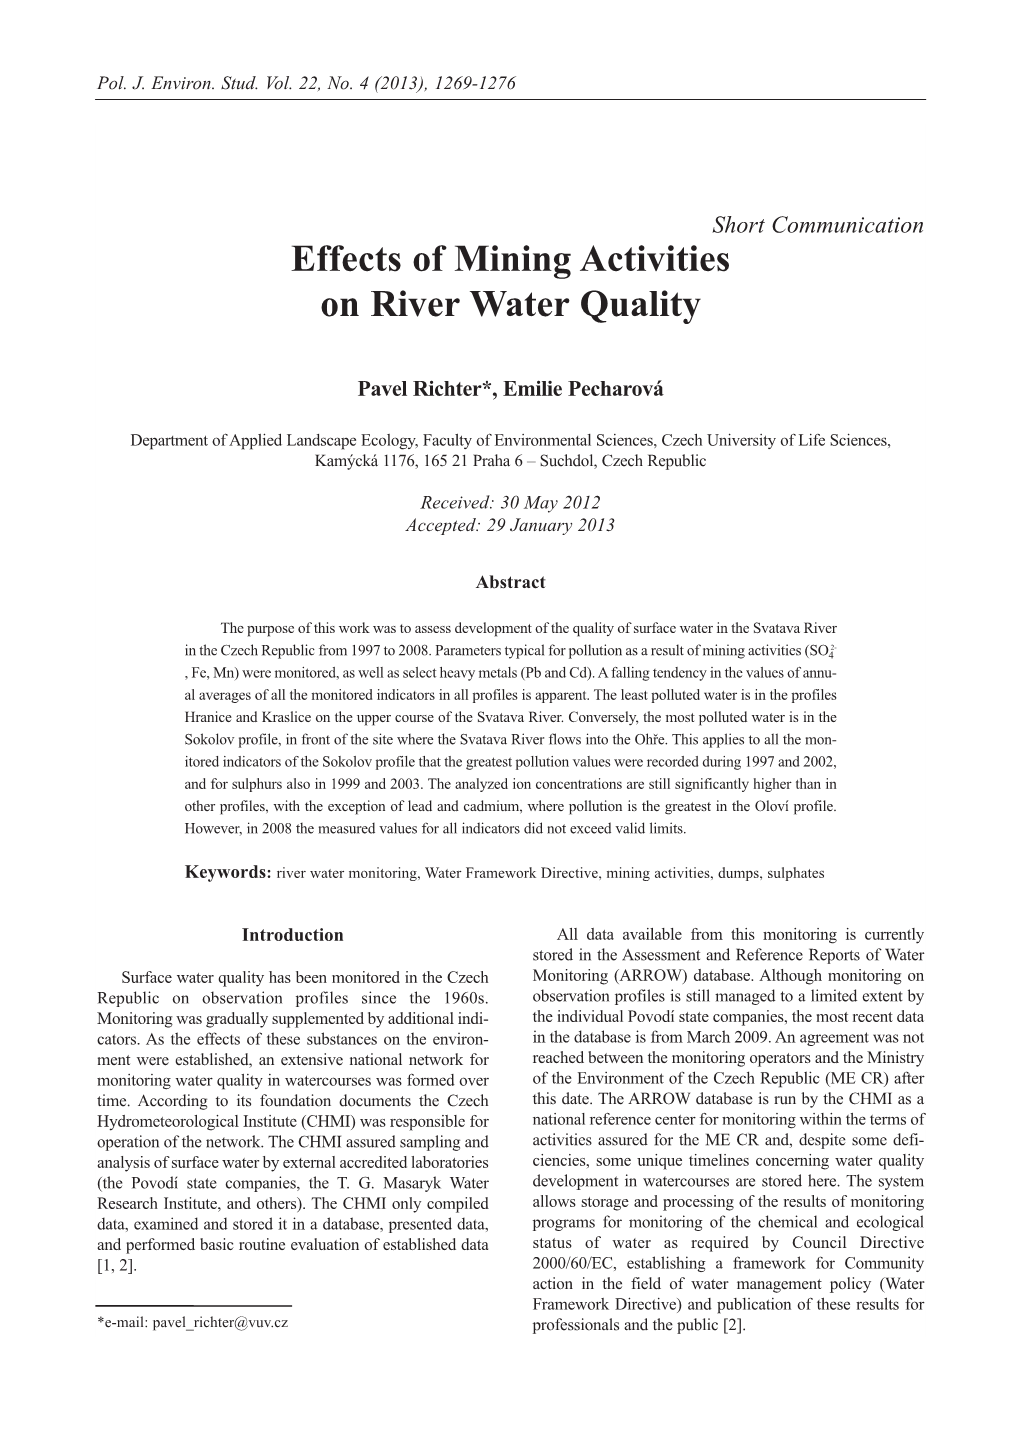 Effects of Mining Activities on River Water Quality